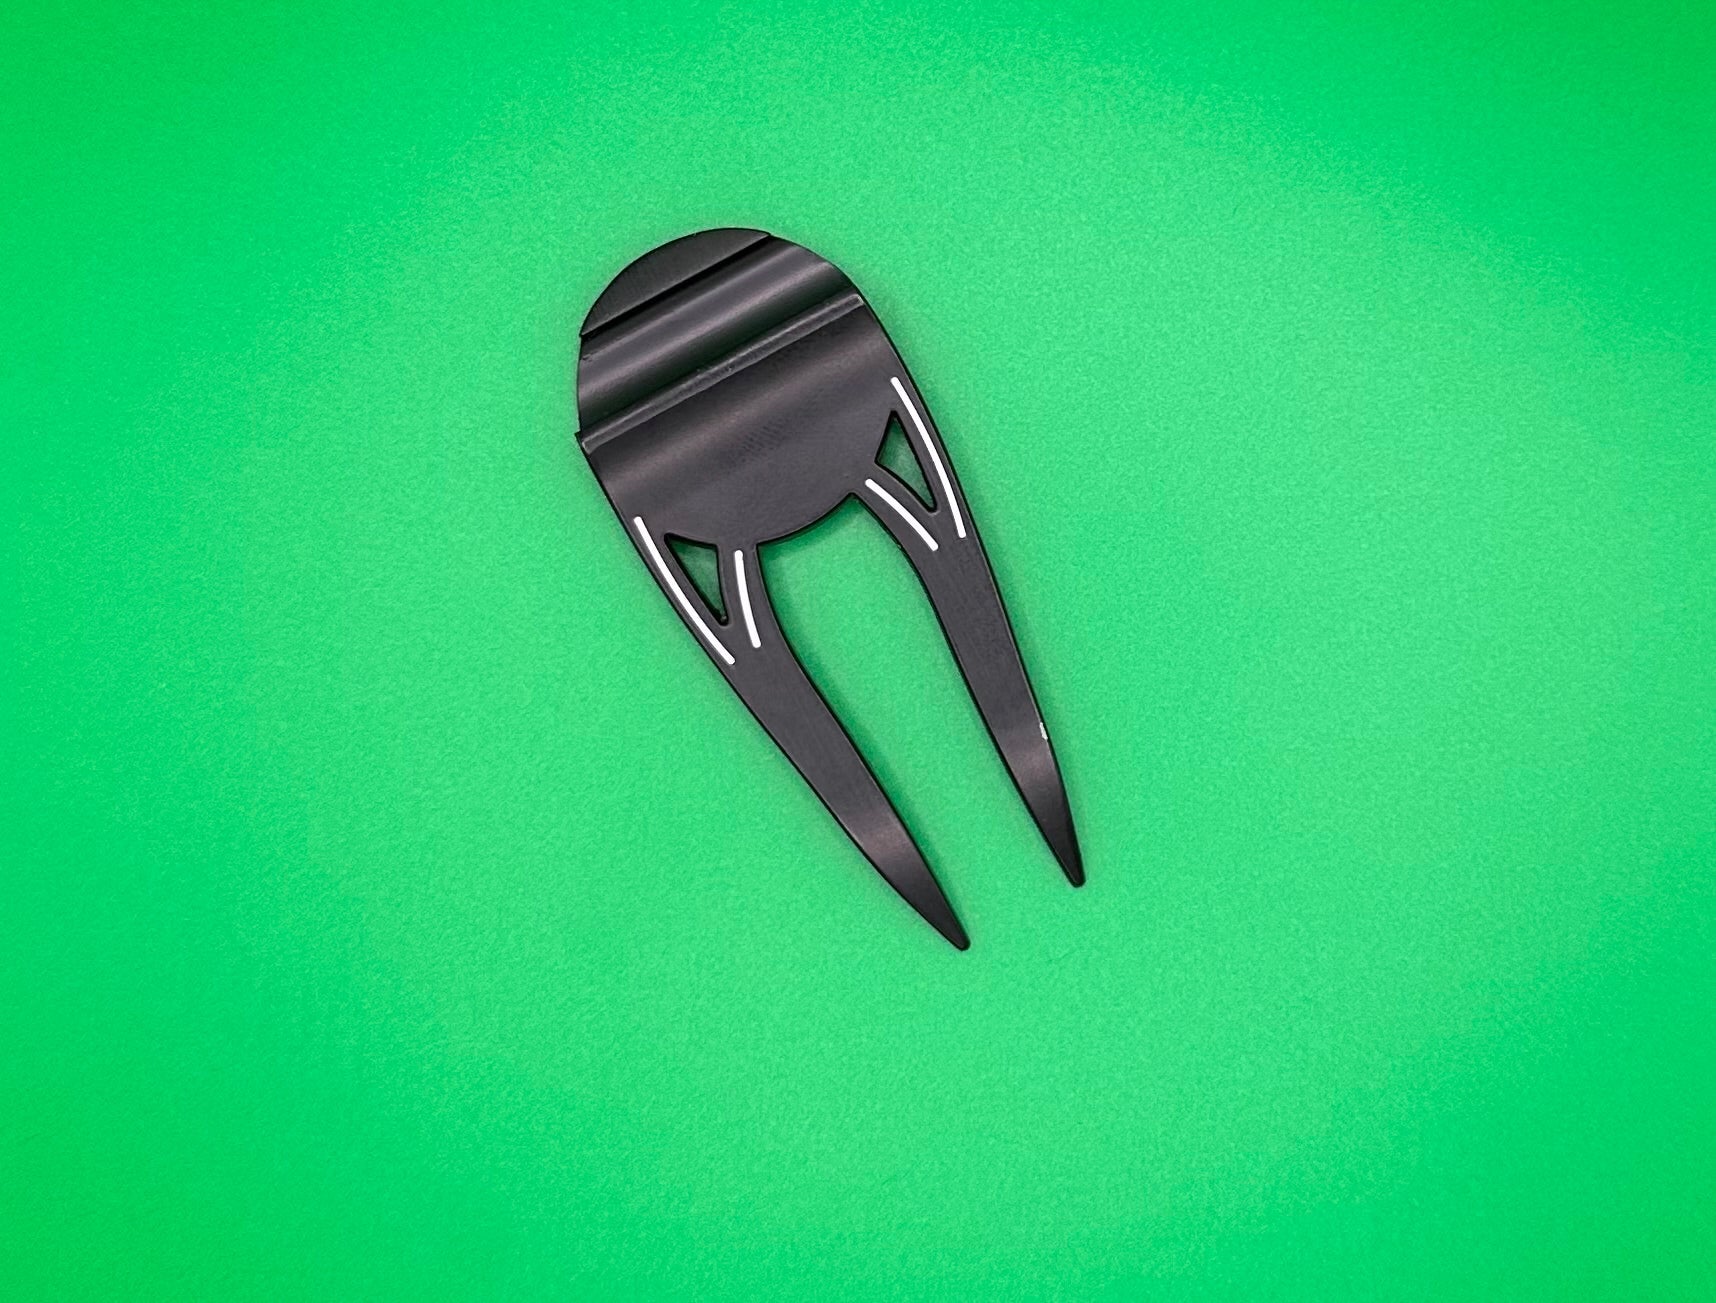 Clubs and Sticks Two Prong Divot Tool - Wholesale